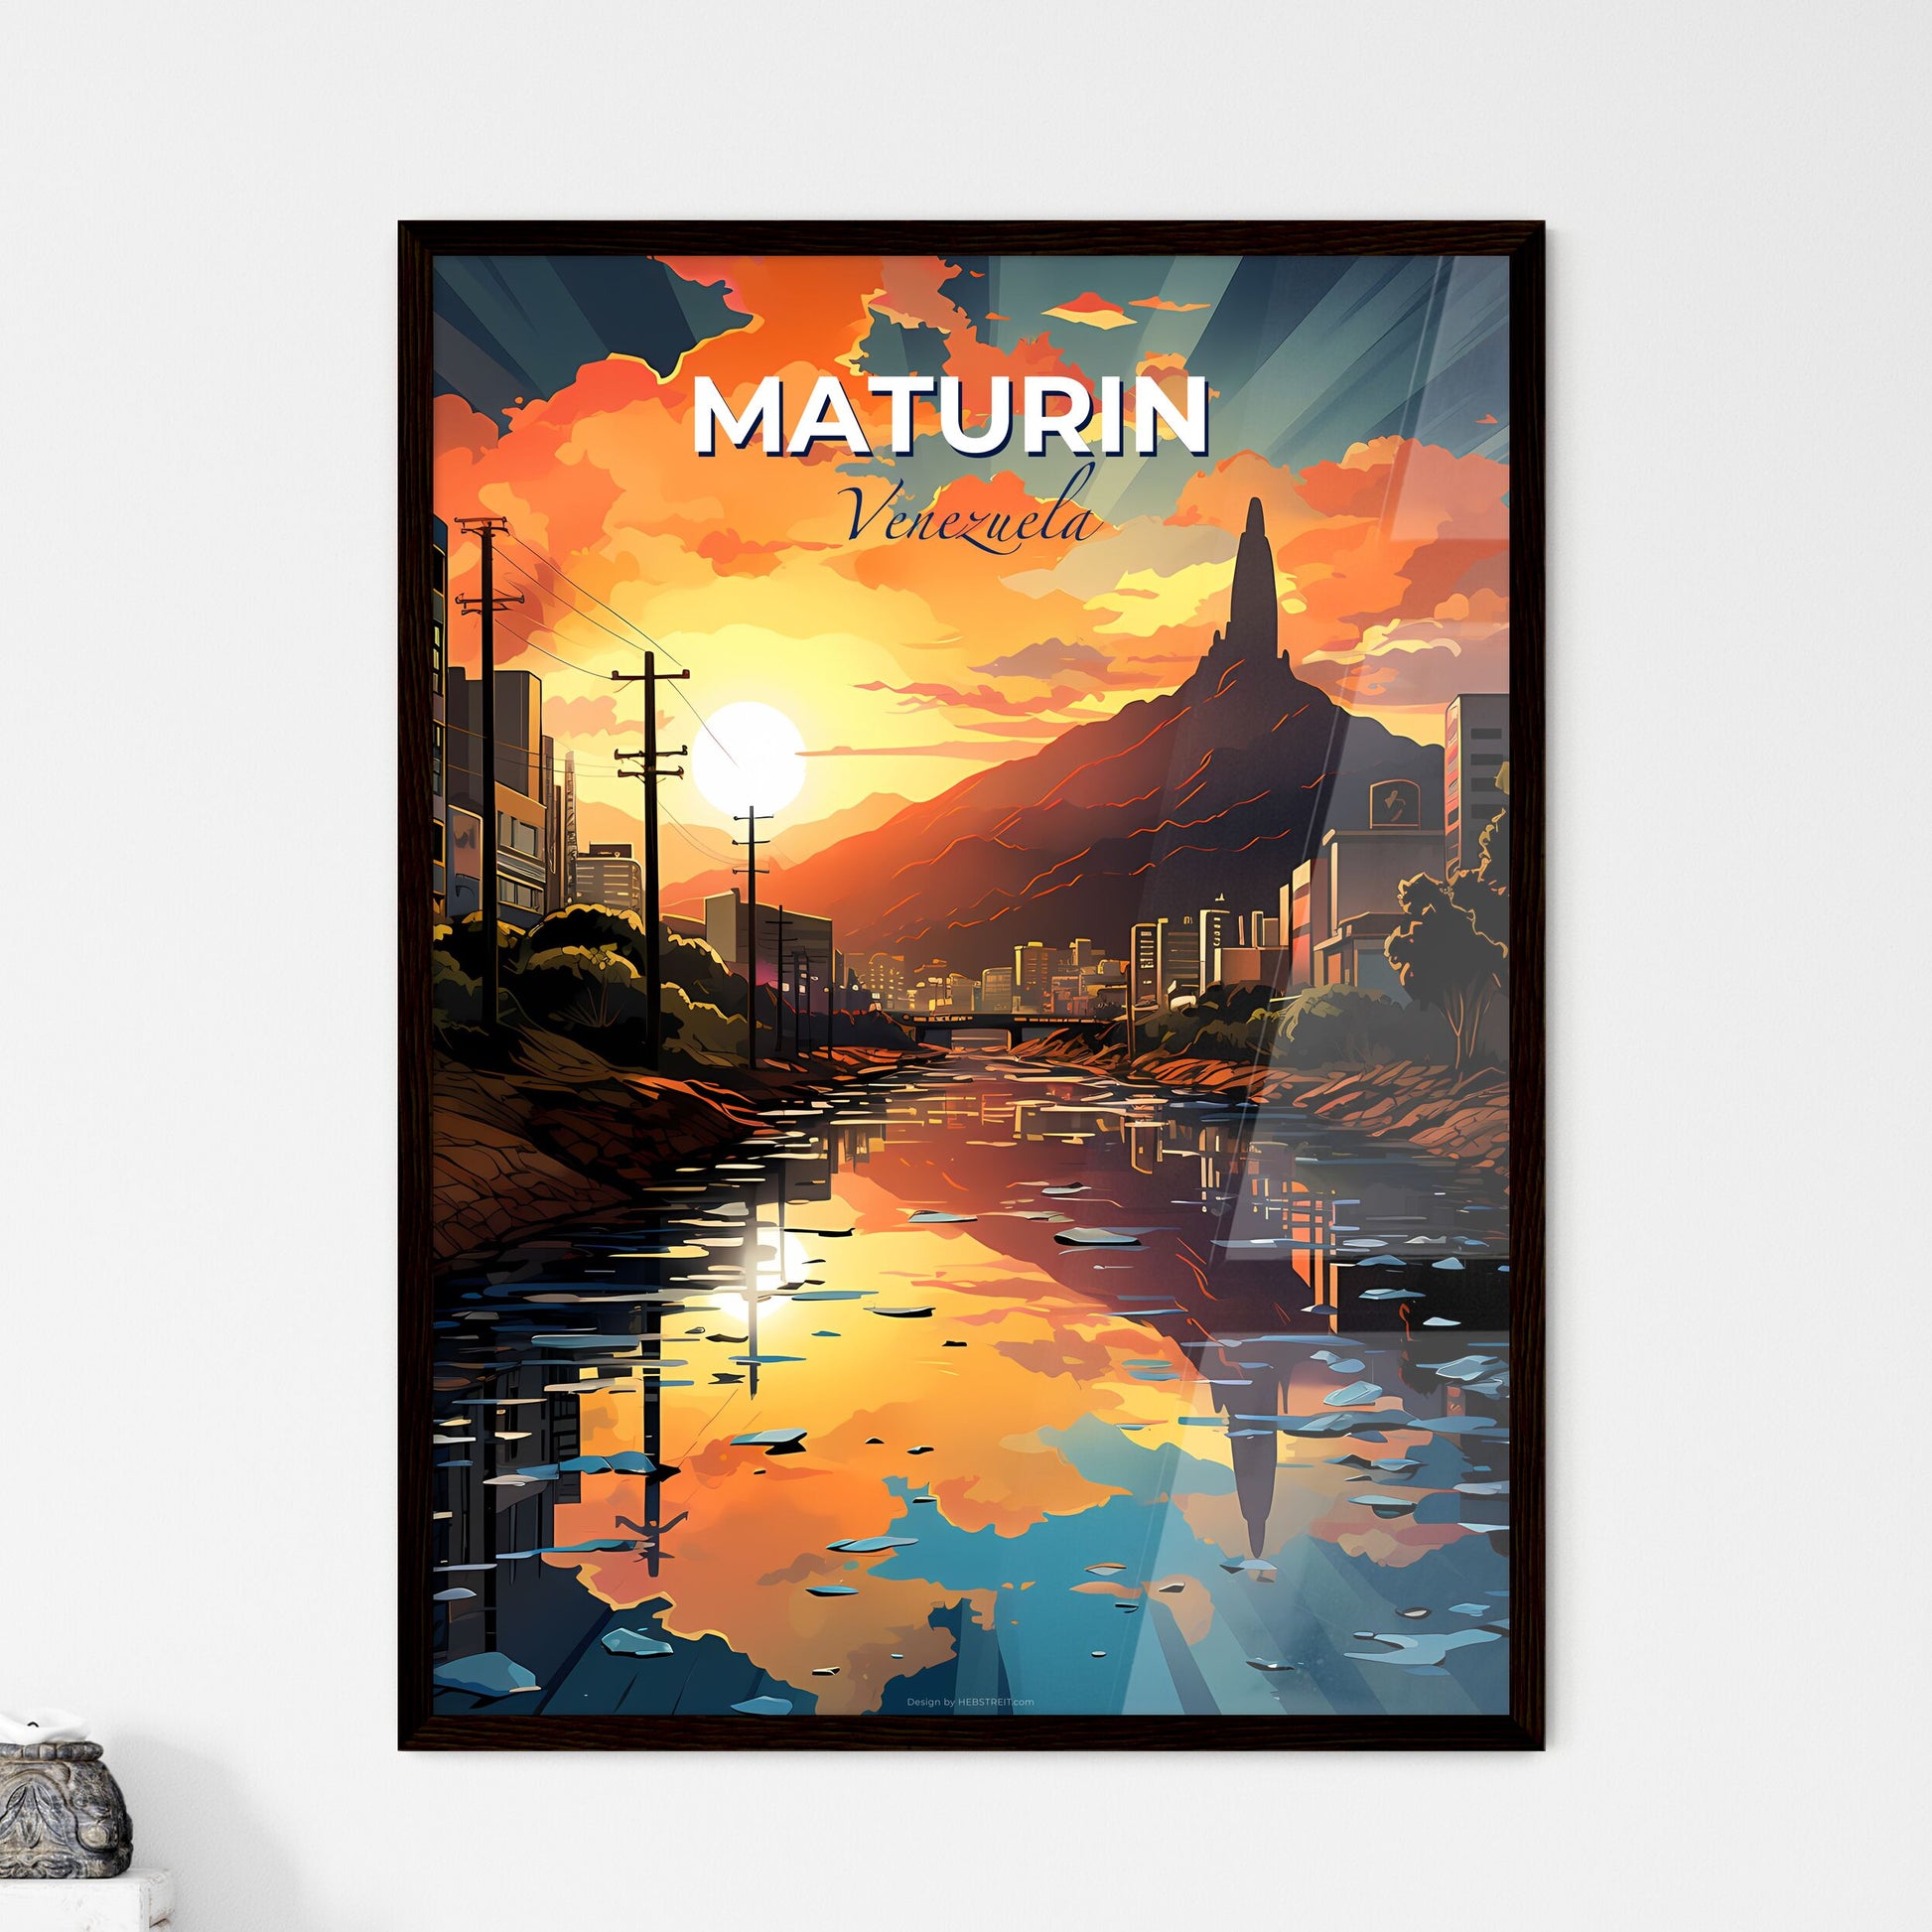 Colorful Maturin Venezuela City Skyline Painting with River and Mountain Background Default Title